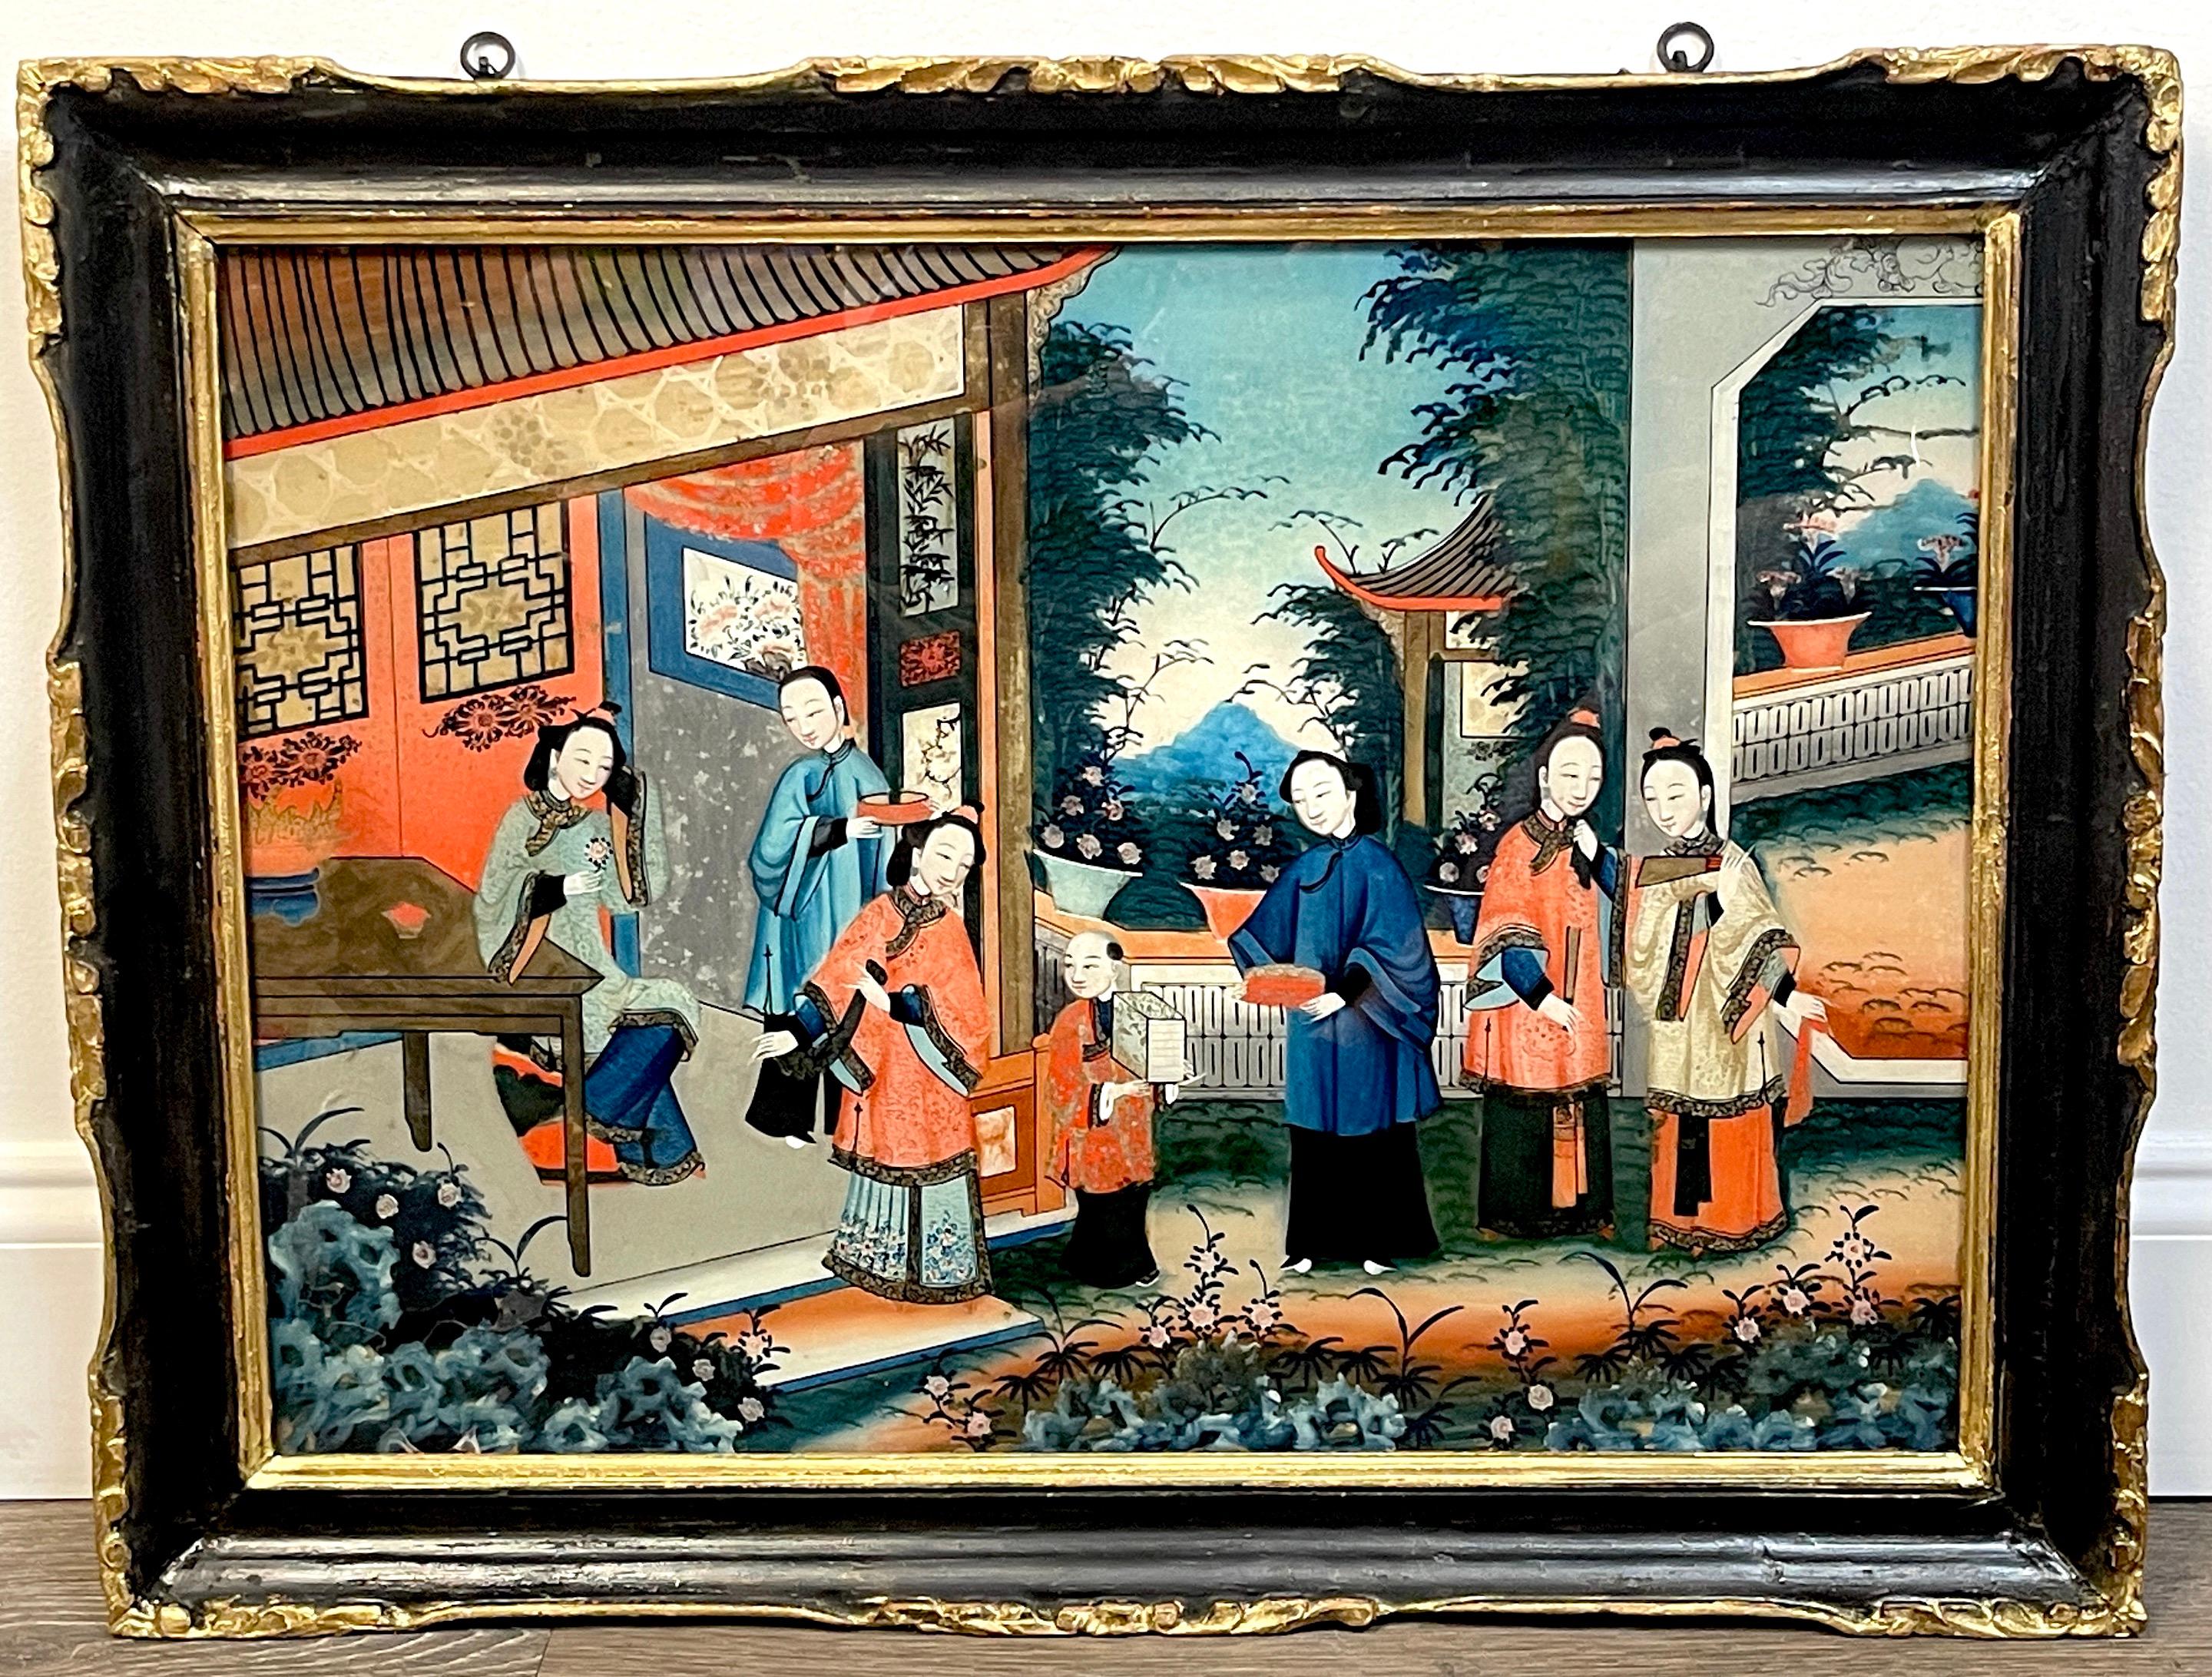 19th Century Chinese Reverse-Painted Pavilion Garden Landscape
Painted with a vivid color palate, the well executed, highly detailed typical outdoor garden court scene, with six woman and one boy. 
Appears to be the original ebonized and gilt